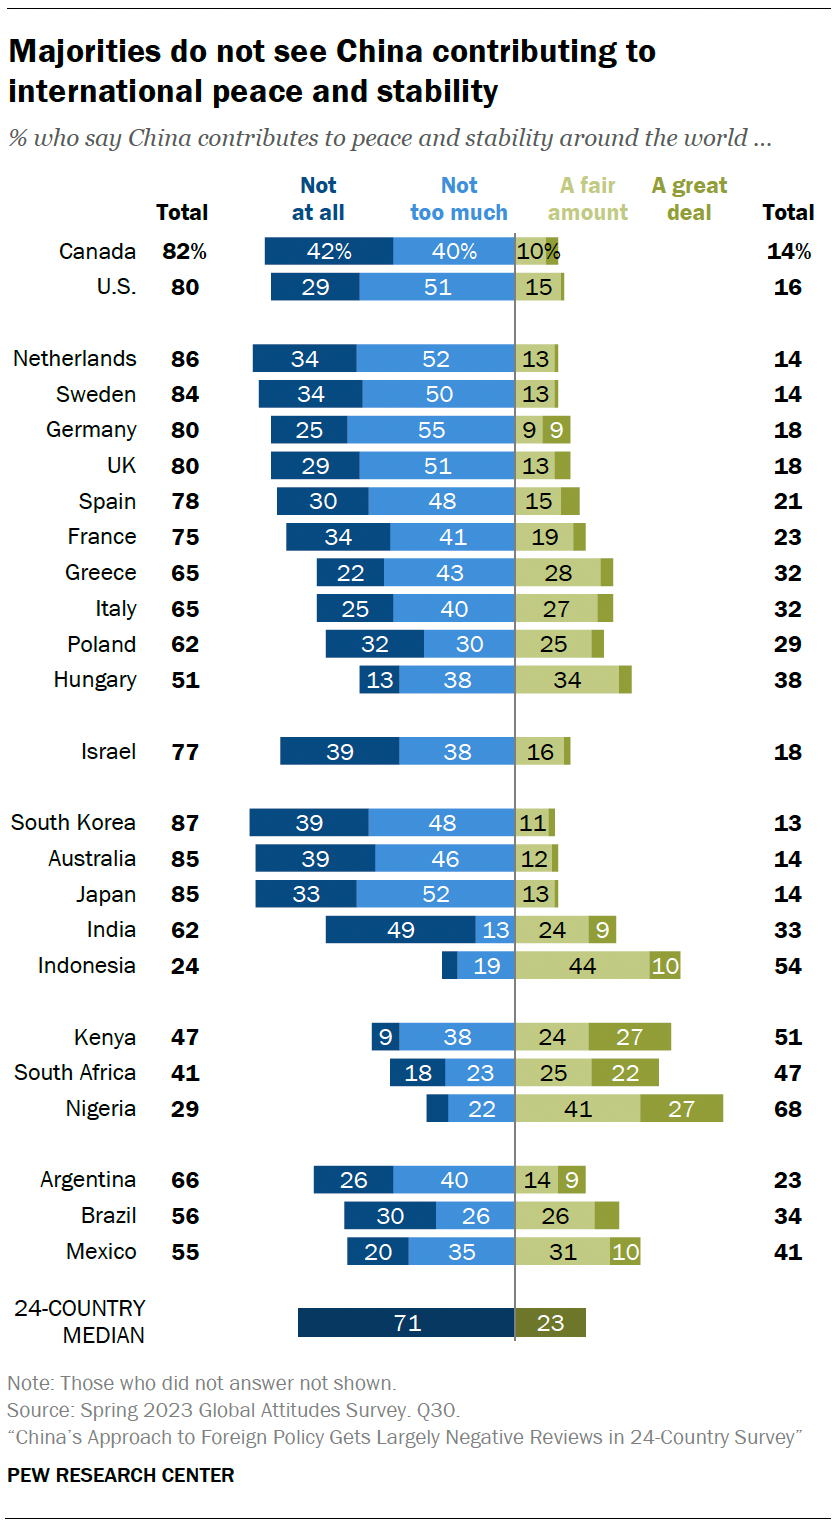 Majorities do not see China contributing to international peace and stability